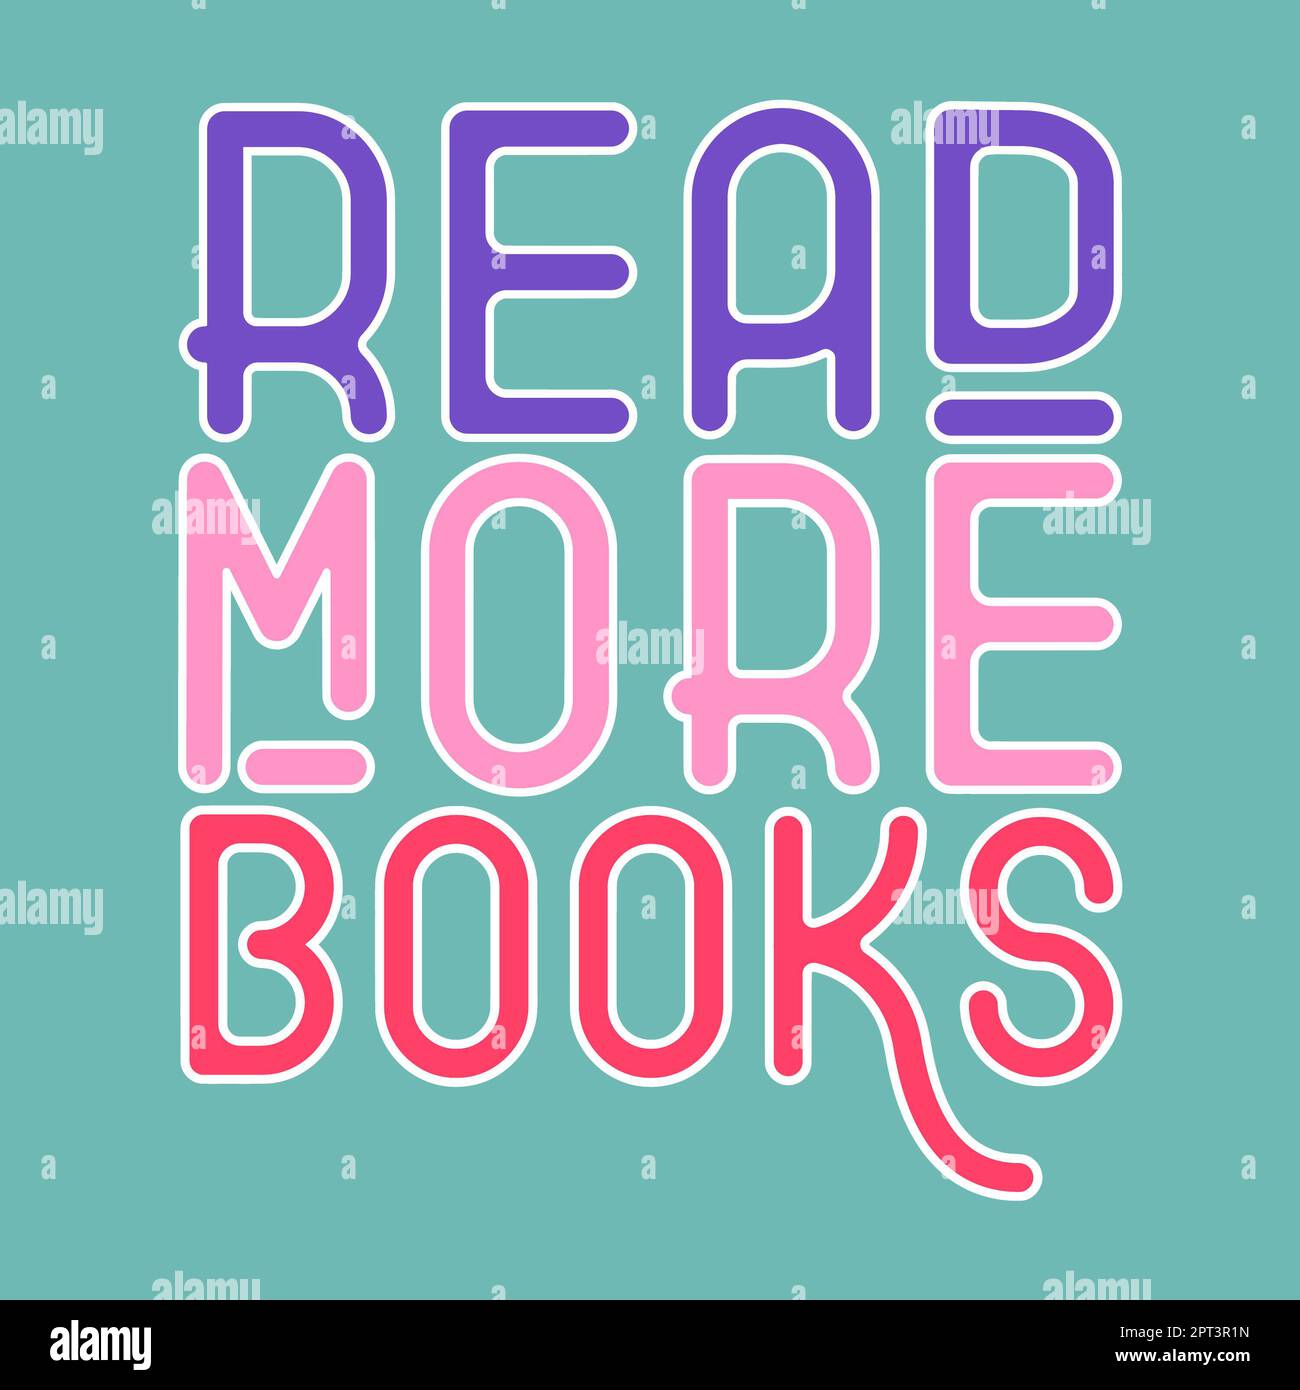 Read more books colorful typography graphic design, book illustration, Conceptual phrase for shirt or poster, words lettering, library art phrase, sim Stock Photo